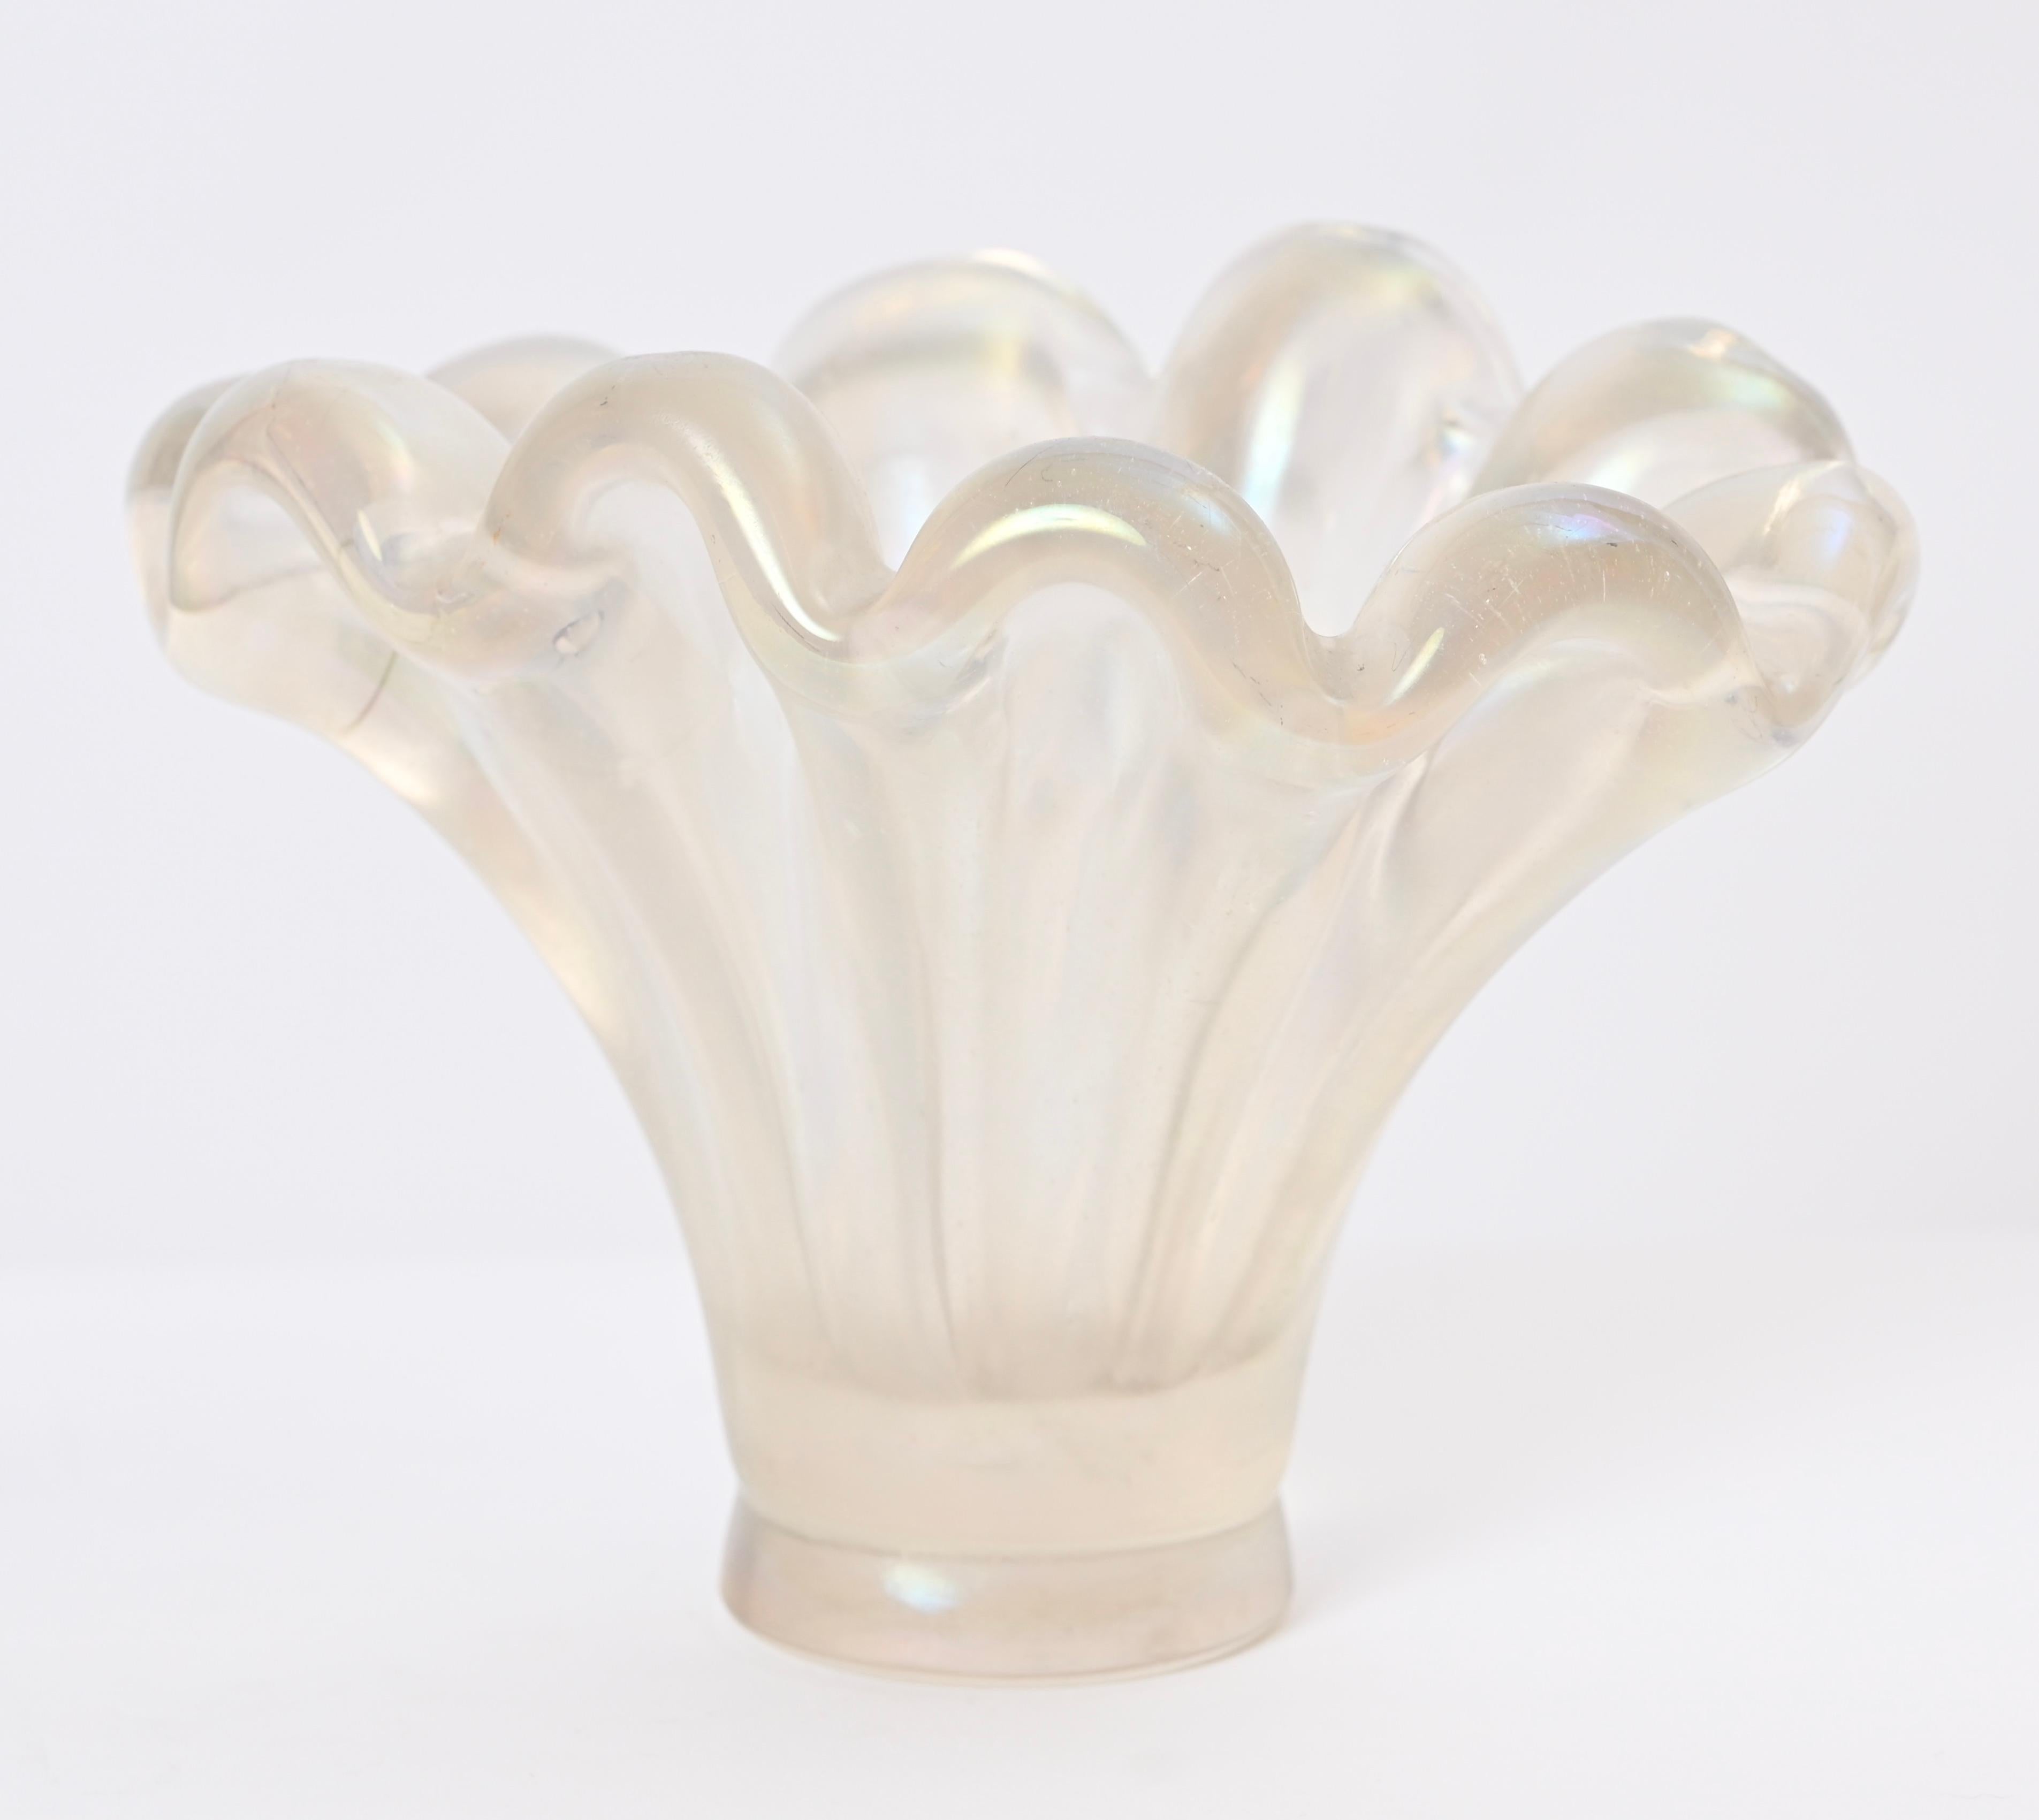 A stunning vase from one of the masters of Murano glass production, Ercole Barovier. Produced in 1942, this vase was produced from the series 'a grosse costolature'. Typical of Barovier's early work, this beautiful, milky white glass shimmers in a